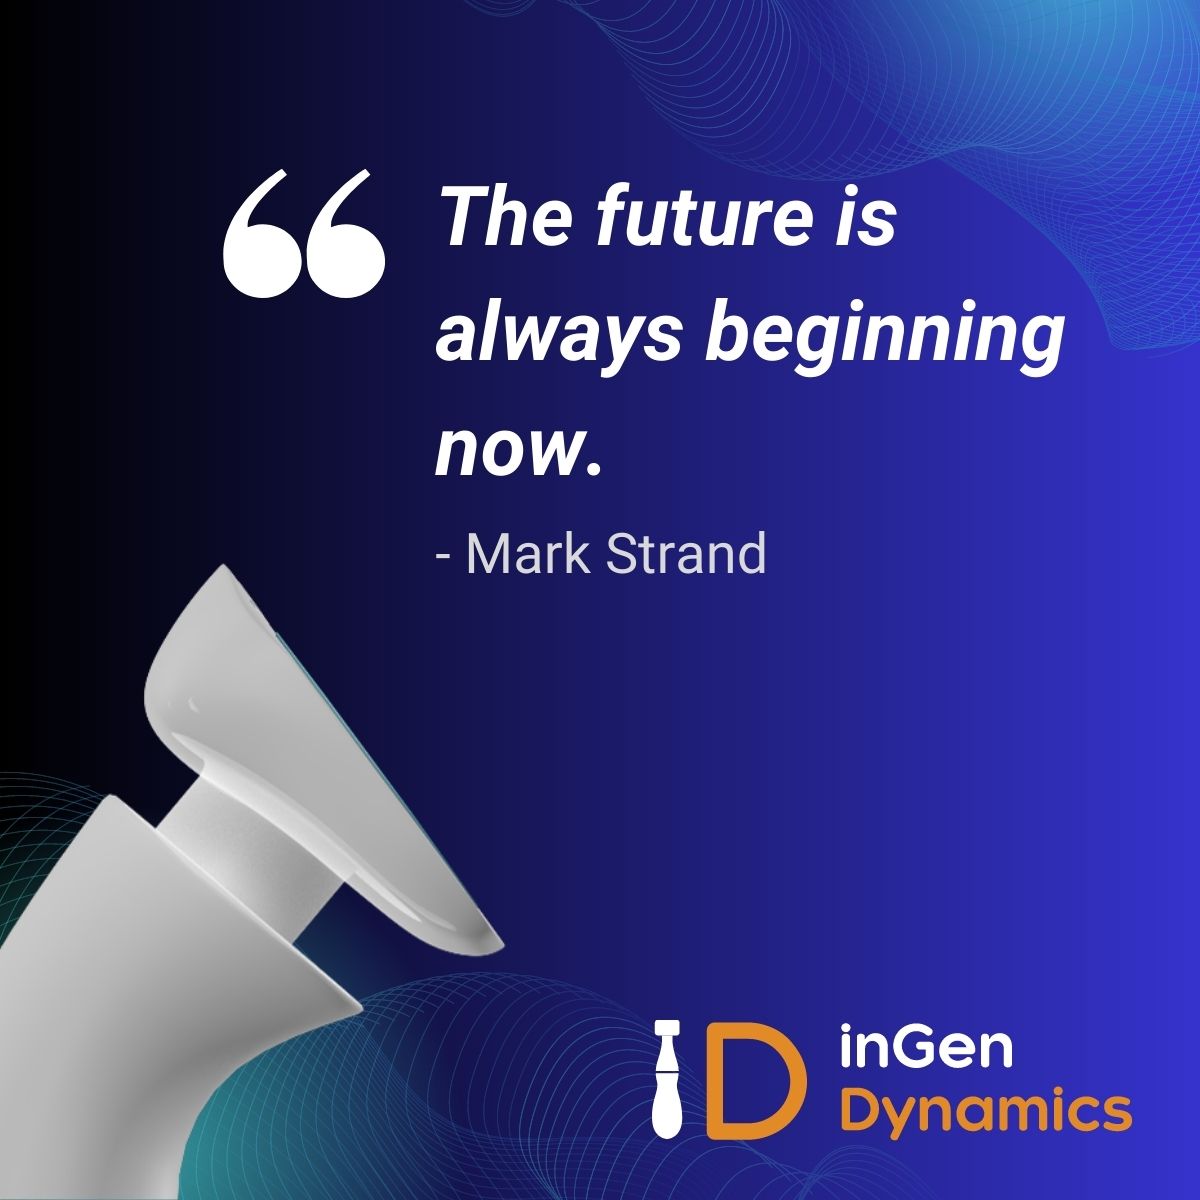 🚀 The future is a constant state of inception, ever evolving and ever hopeful. 🌠 Today is the canvas upon which you paint your tomorrow. Let's embrace the endless possibilities! #FutureIsNow #Optimism